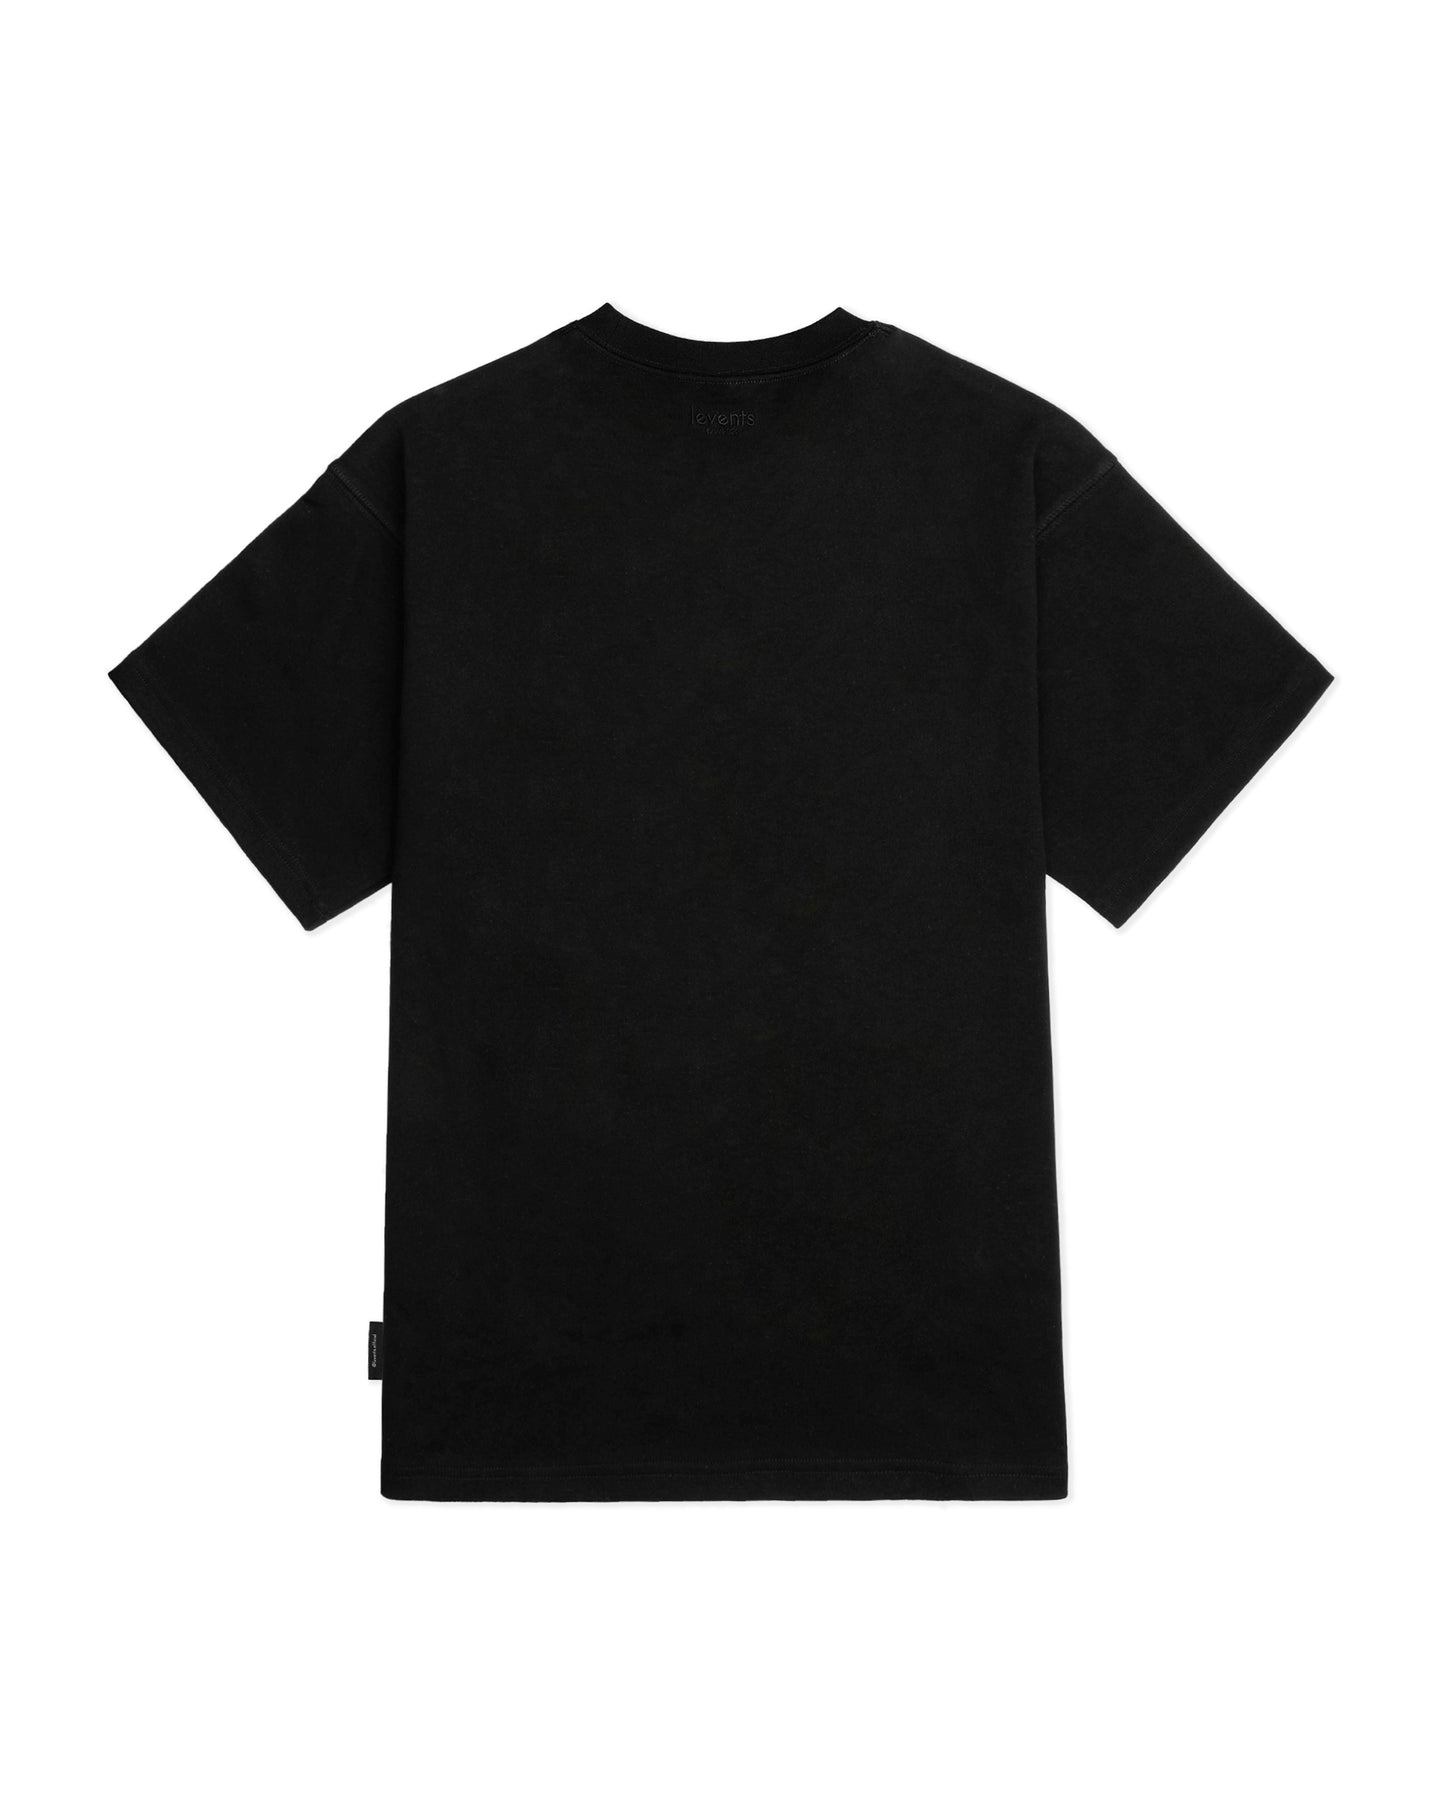 Levents® Got This Tee/ Black